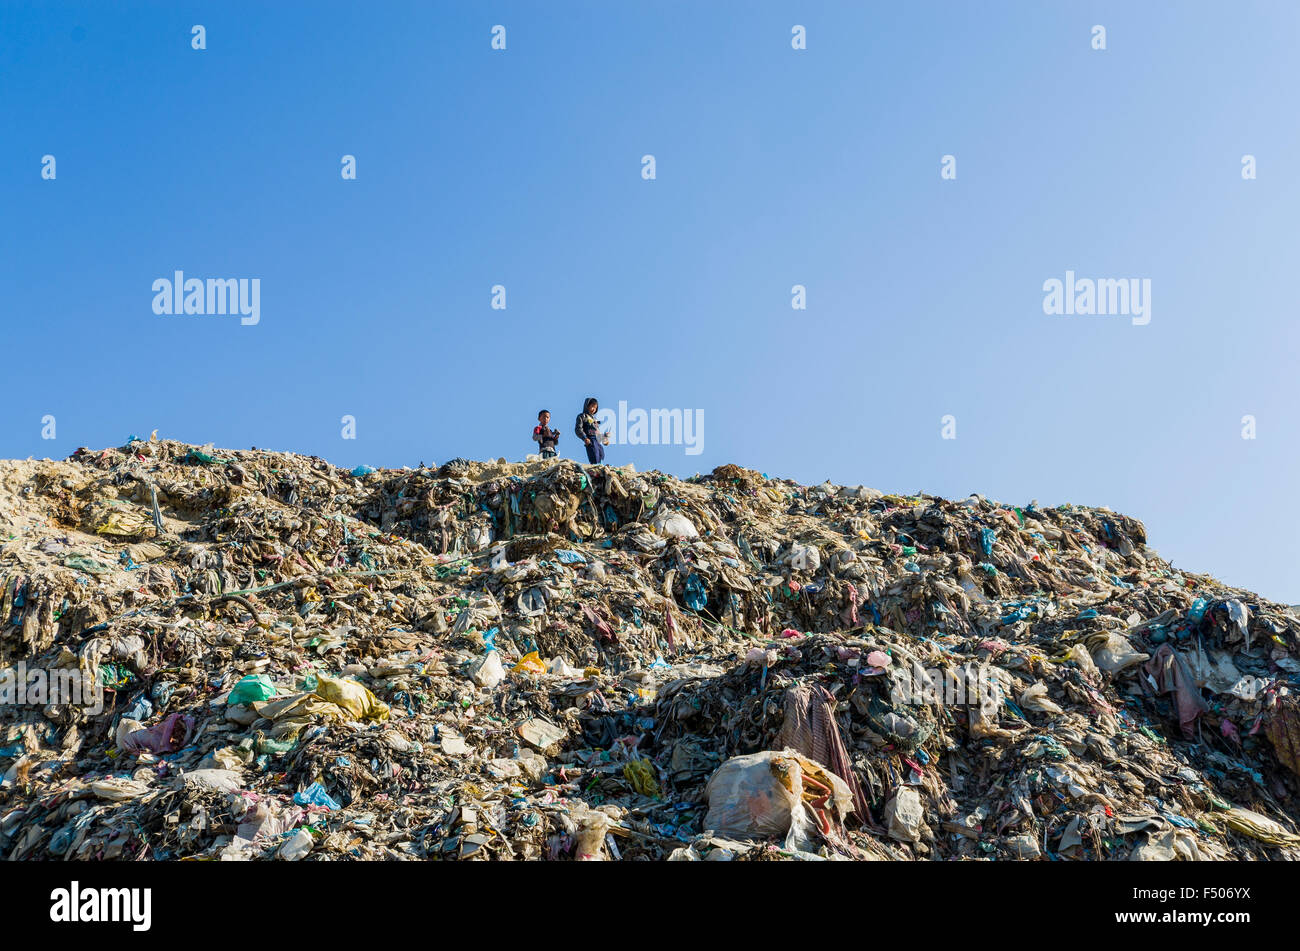 Children live, play and work on the garbage dump at Aletar garbage dump Stock Photo